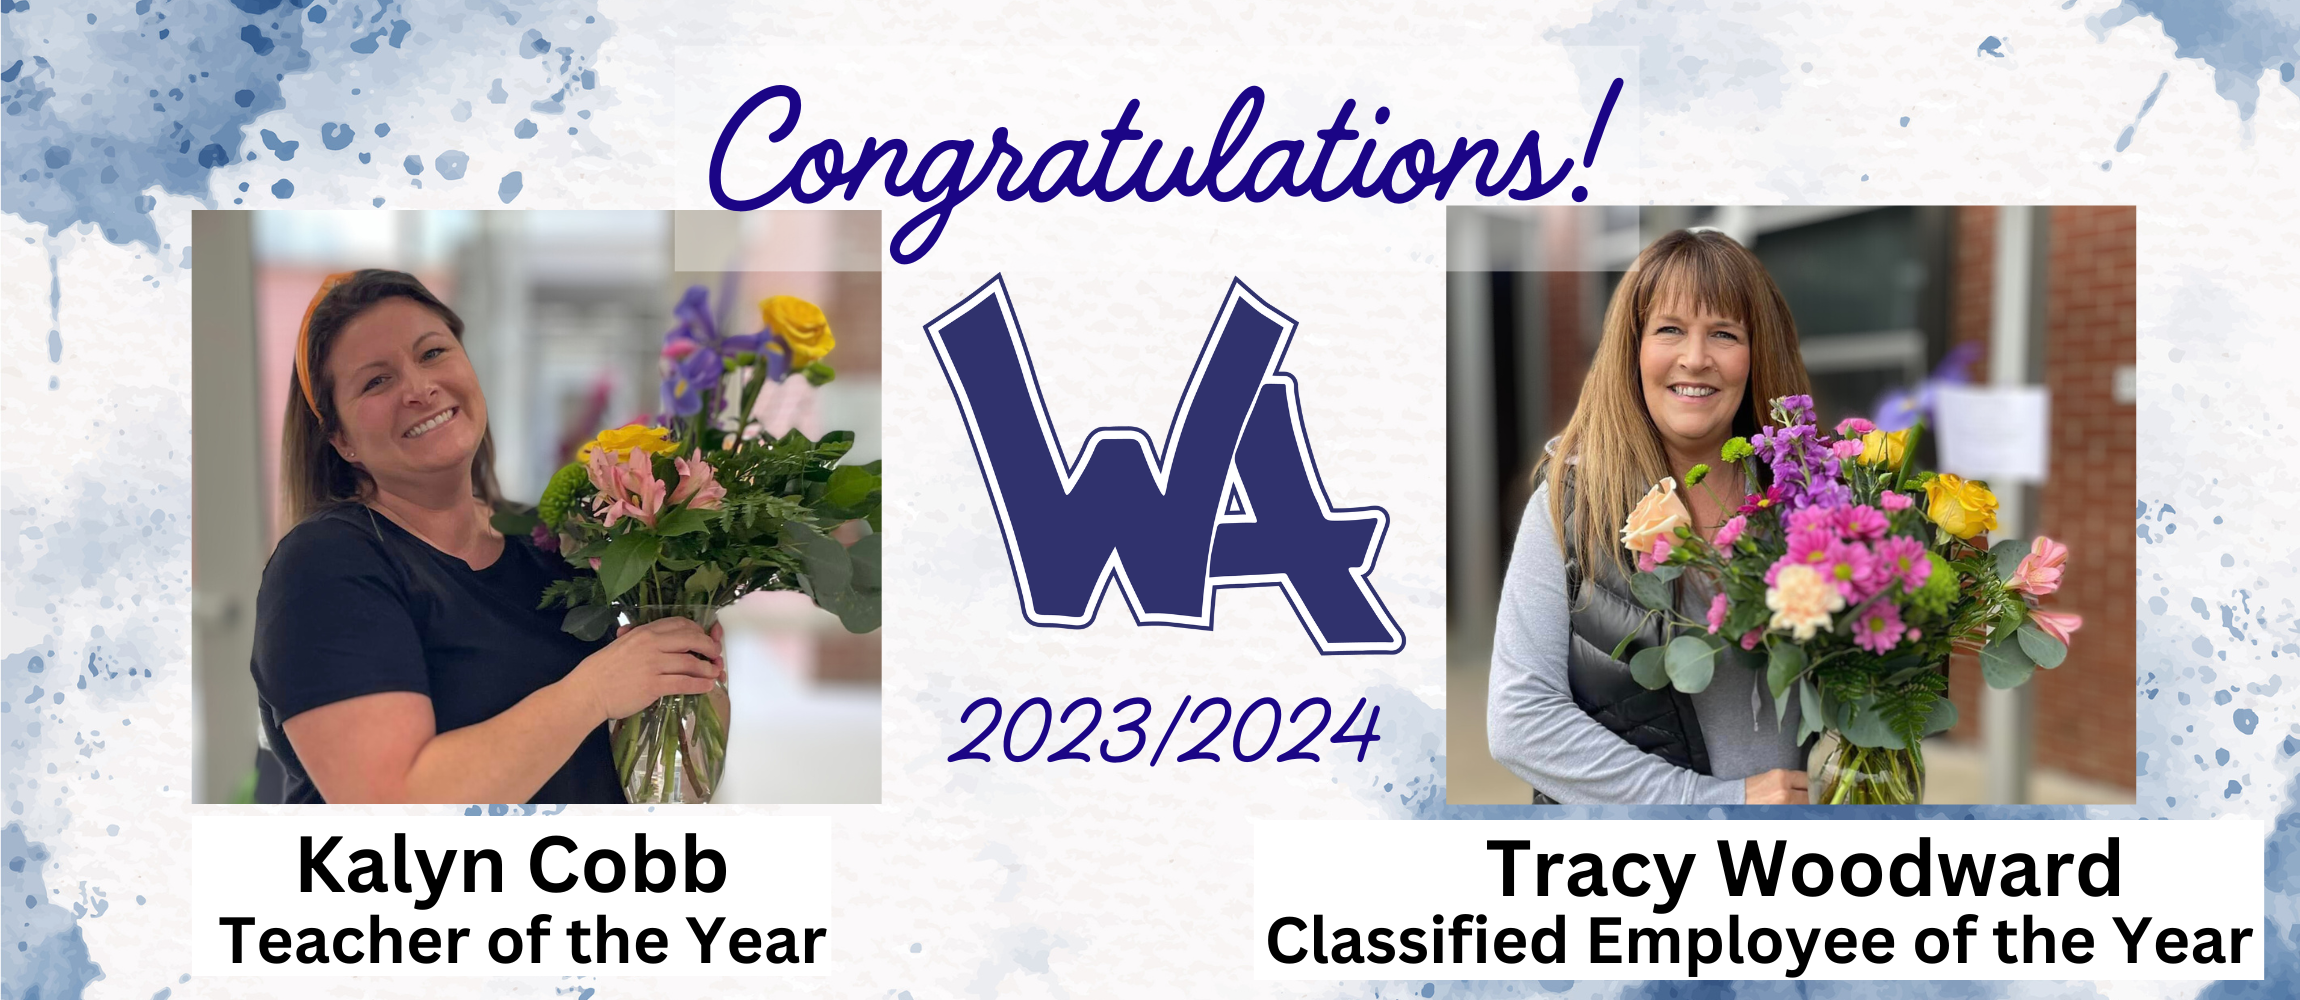 Congratulations to our teacher of the year and the classified employee of the year